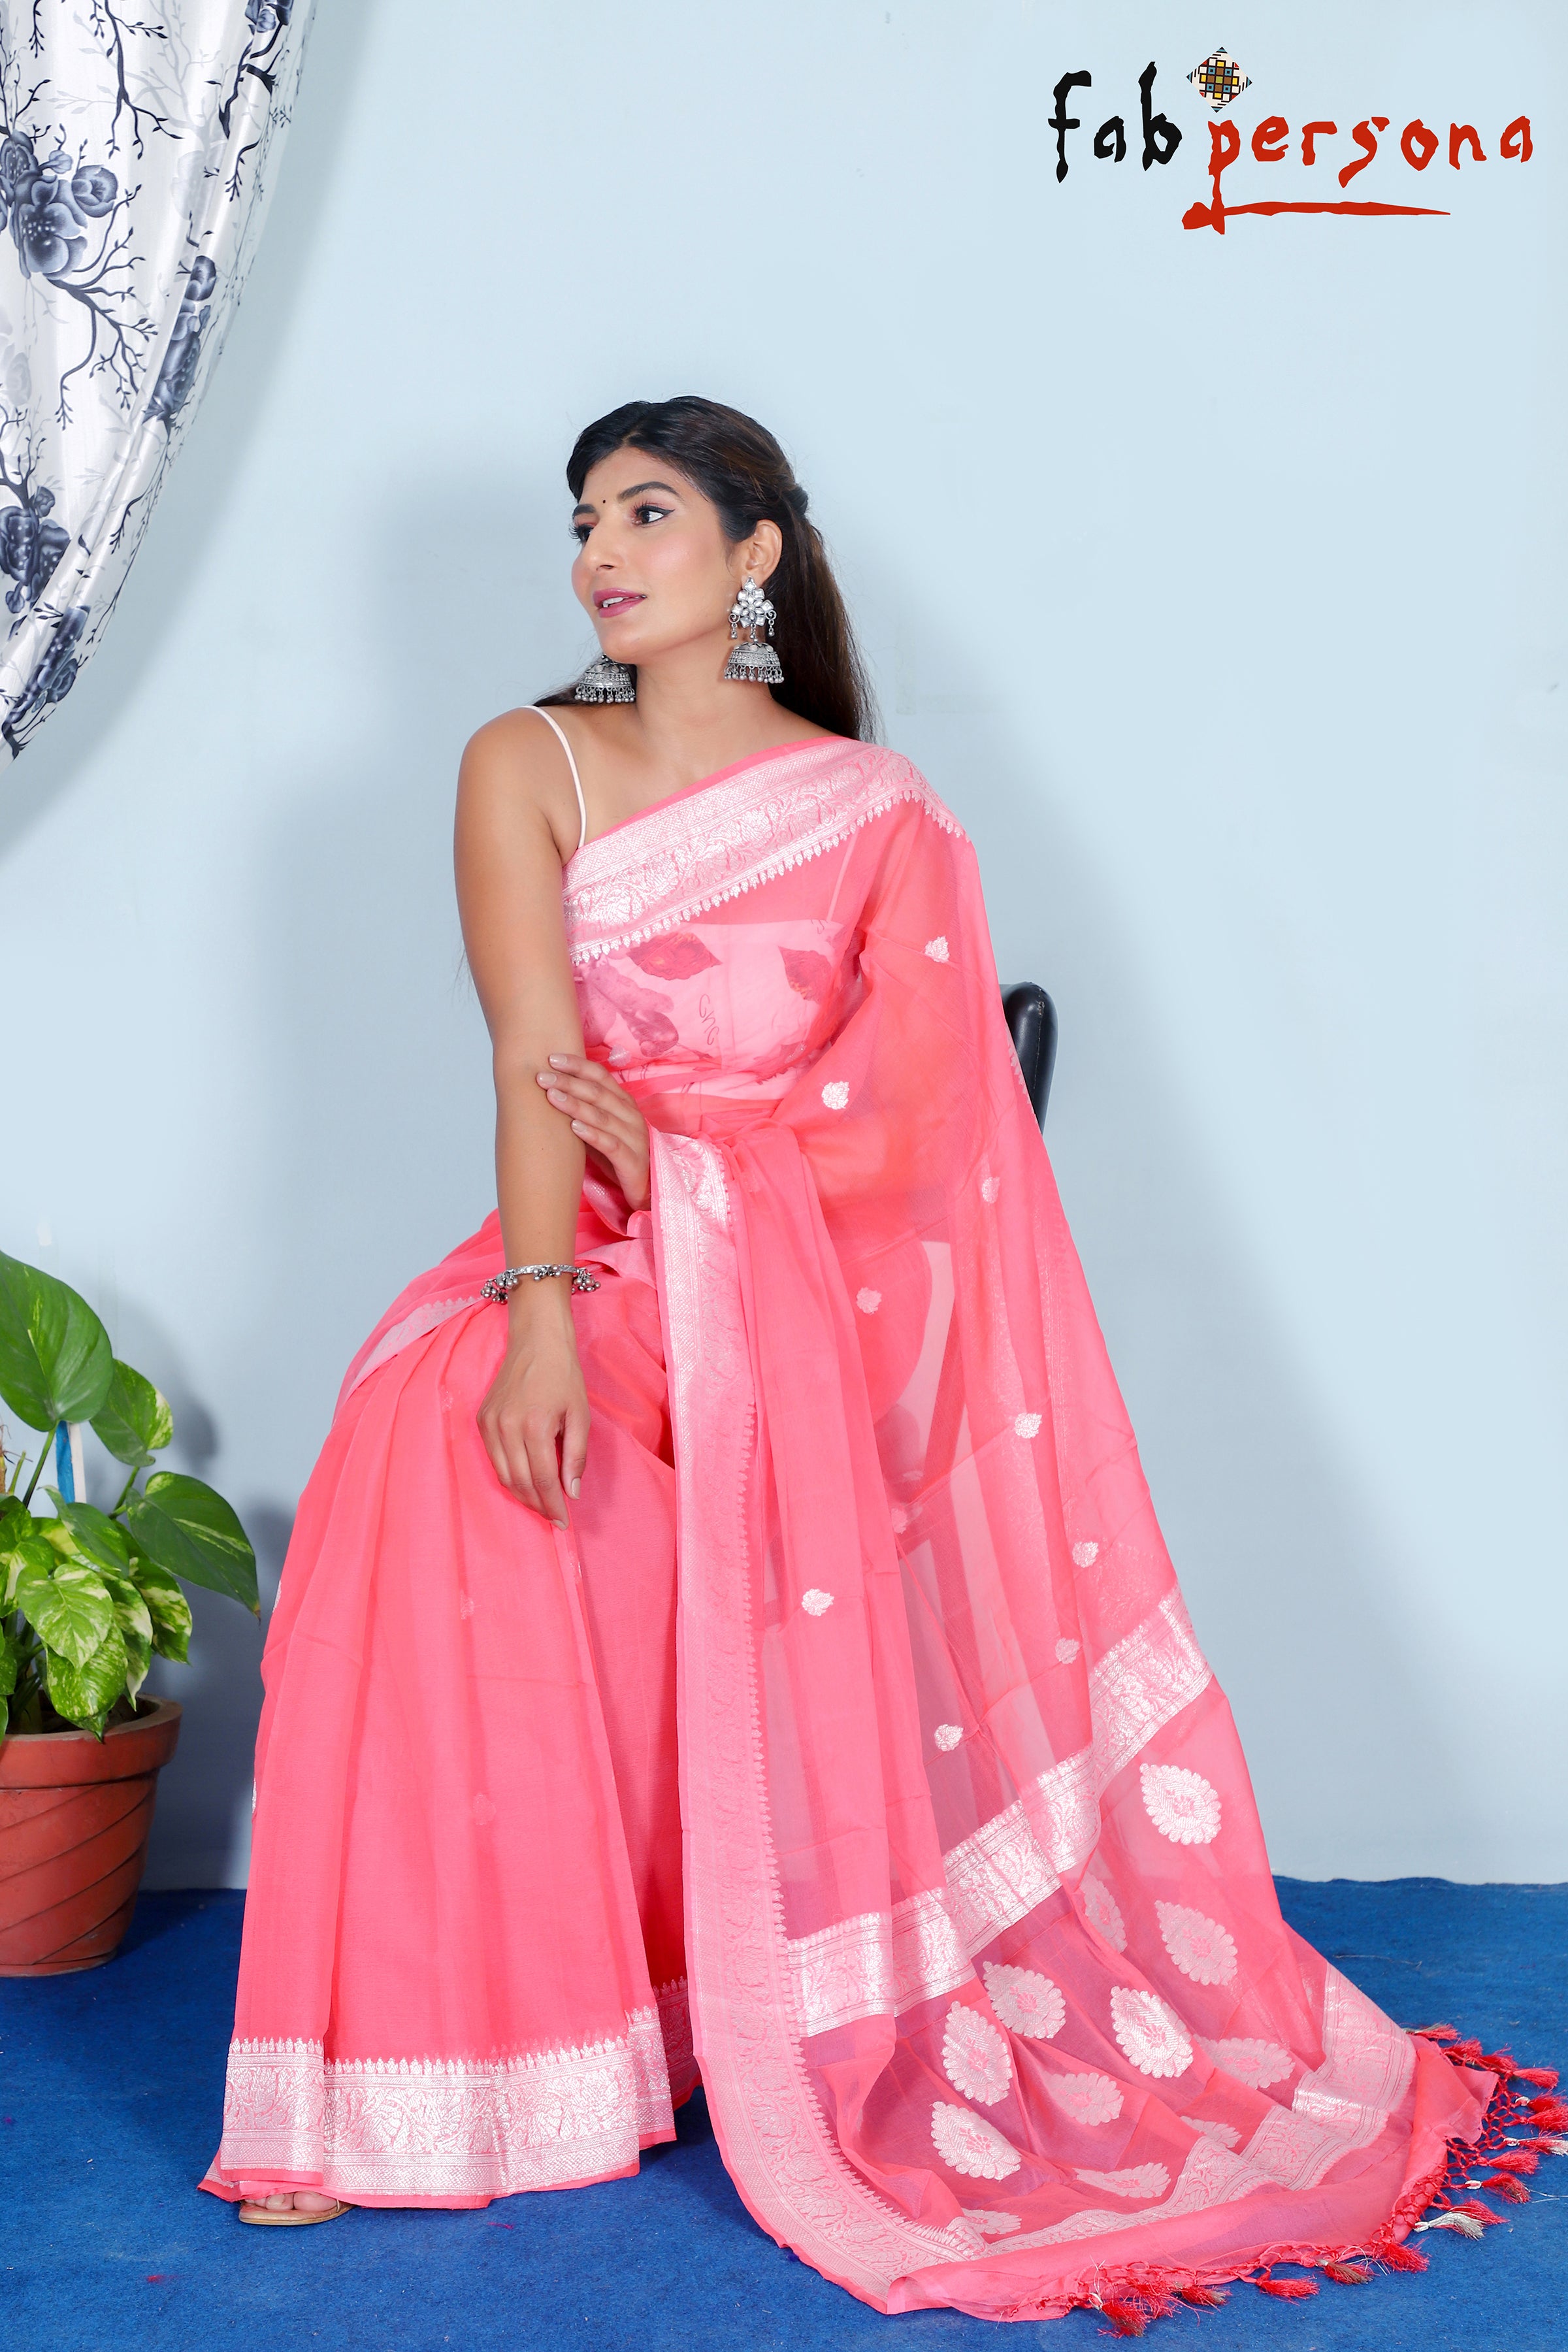 Top 5 South Indian Wedding Saree Trends - Dreaming Loud | Saree trends,  Indian saree blouses designs, South indian wedding saree